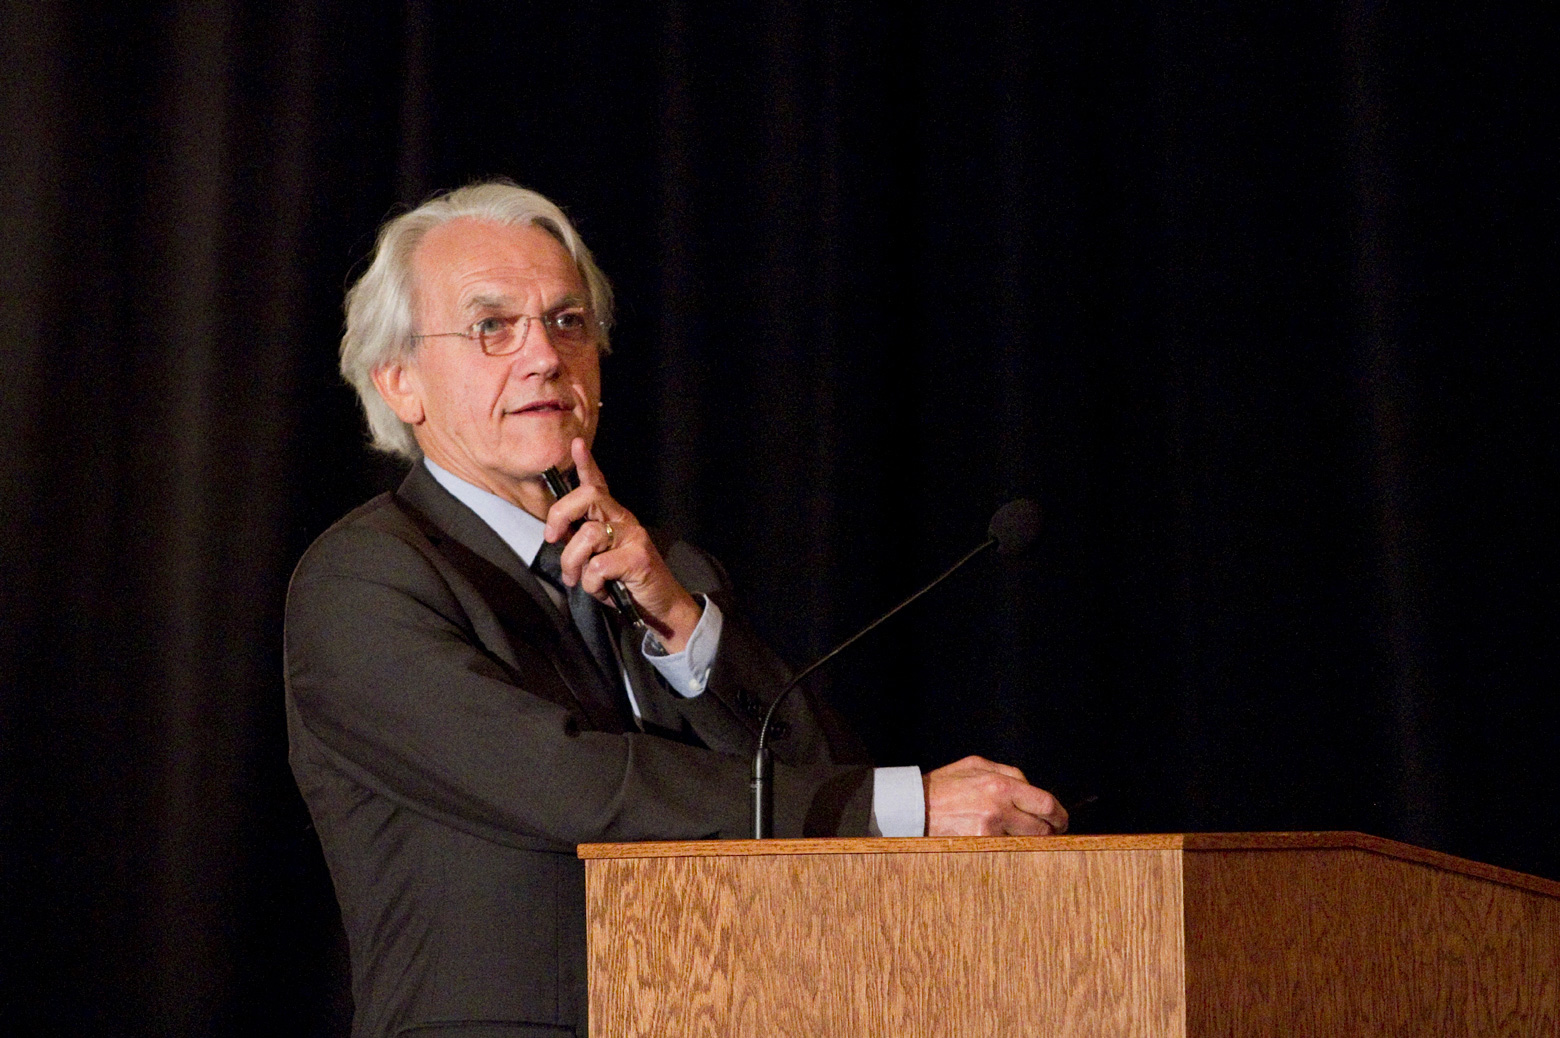 Gerard Mourou speaks at a symposium in 2011 marking the 50th anniversary of the discovery of nonlinear optics at U-M. Daryl Marshke/Michigan Photography